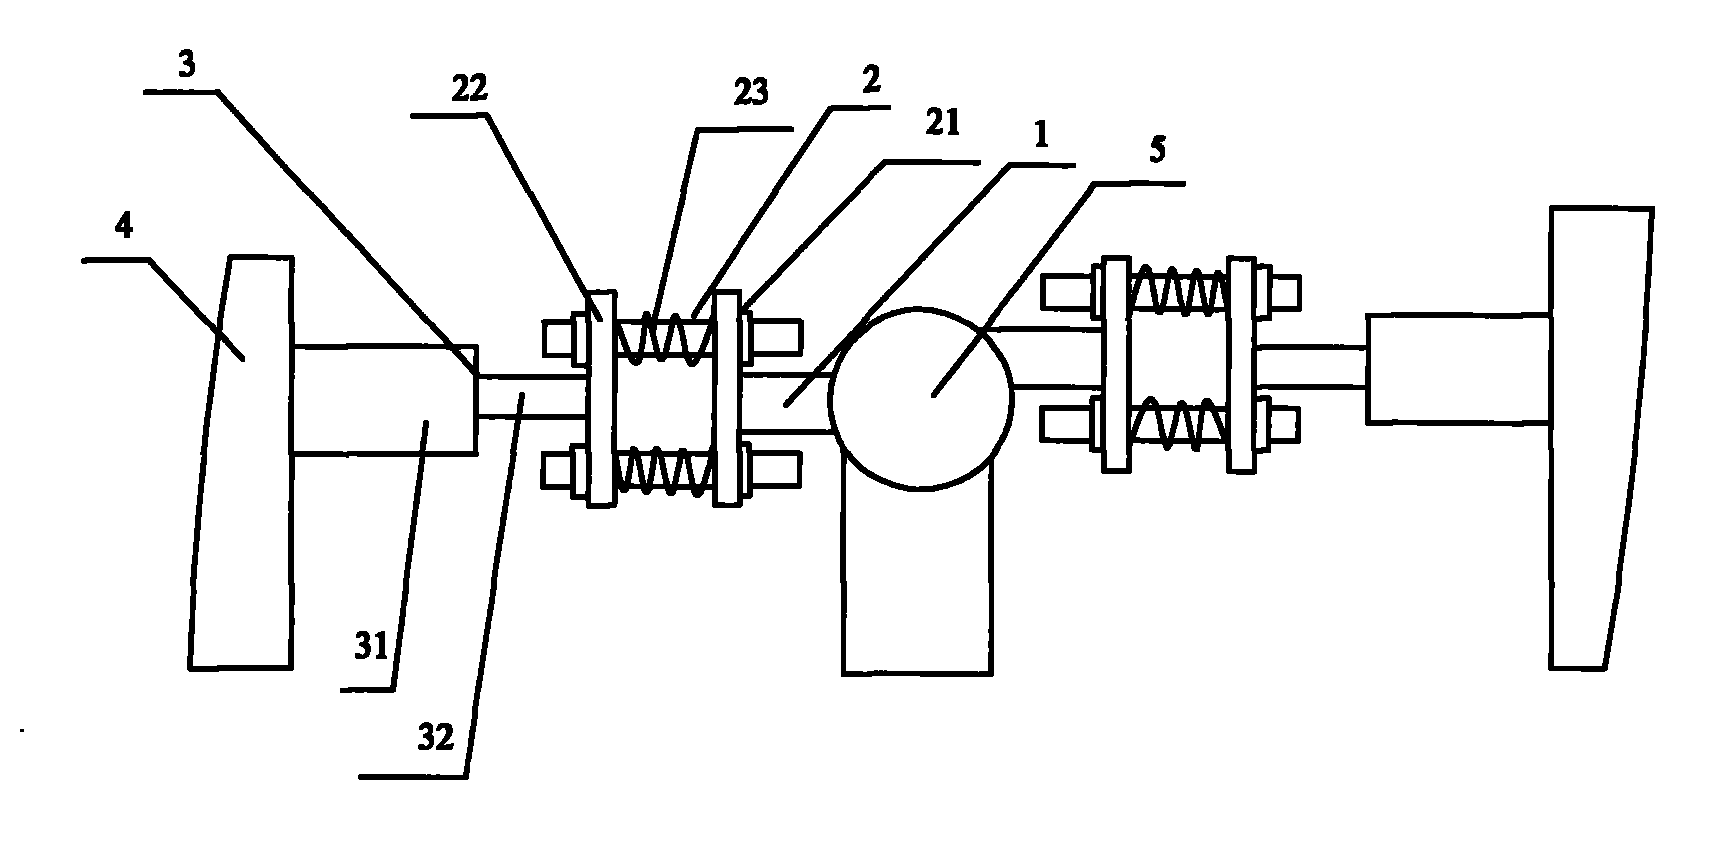 Electroplating cathode conductive device